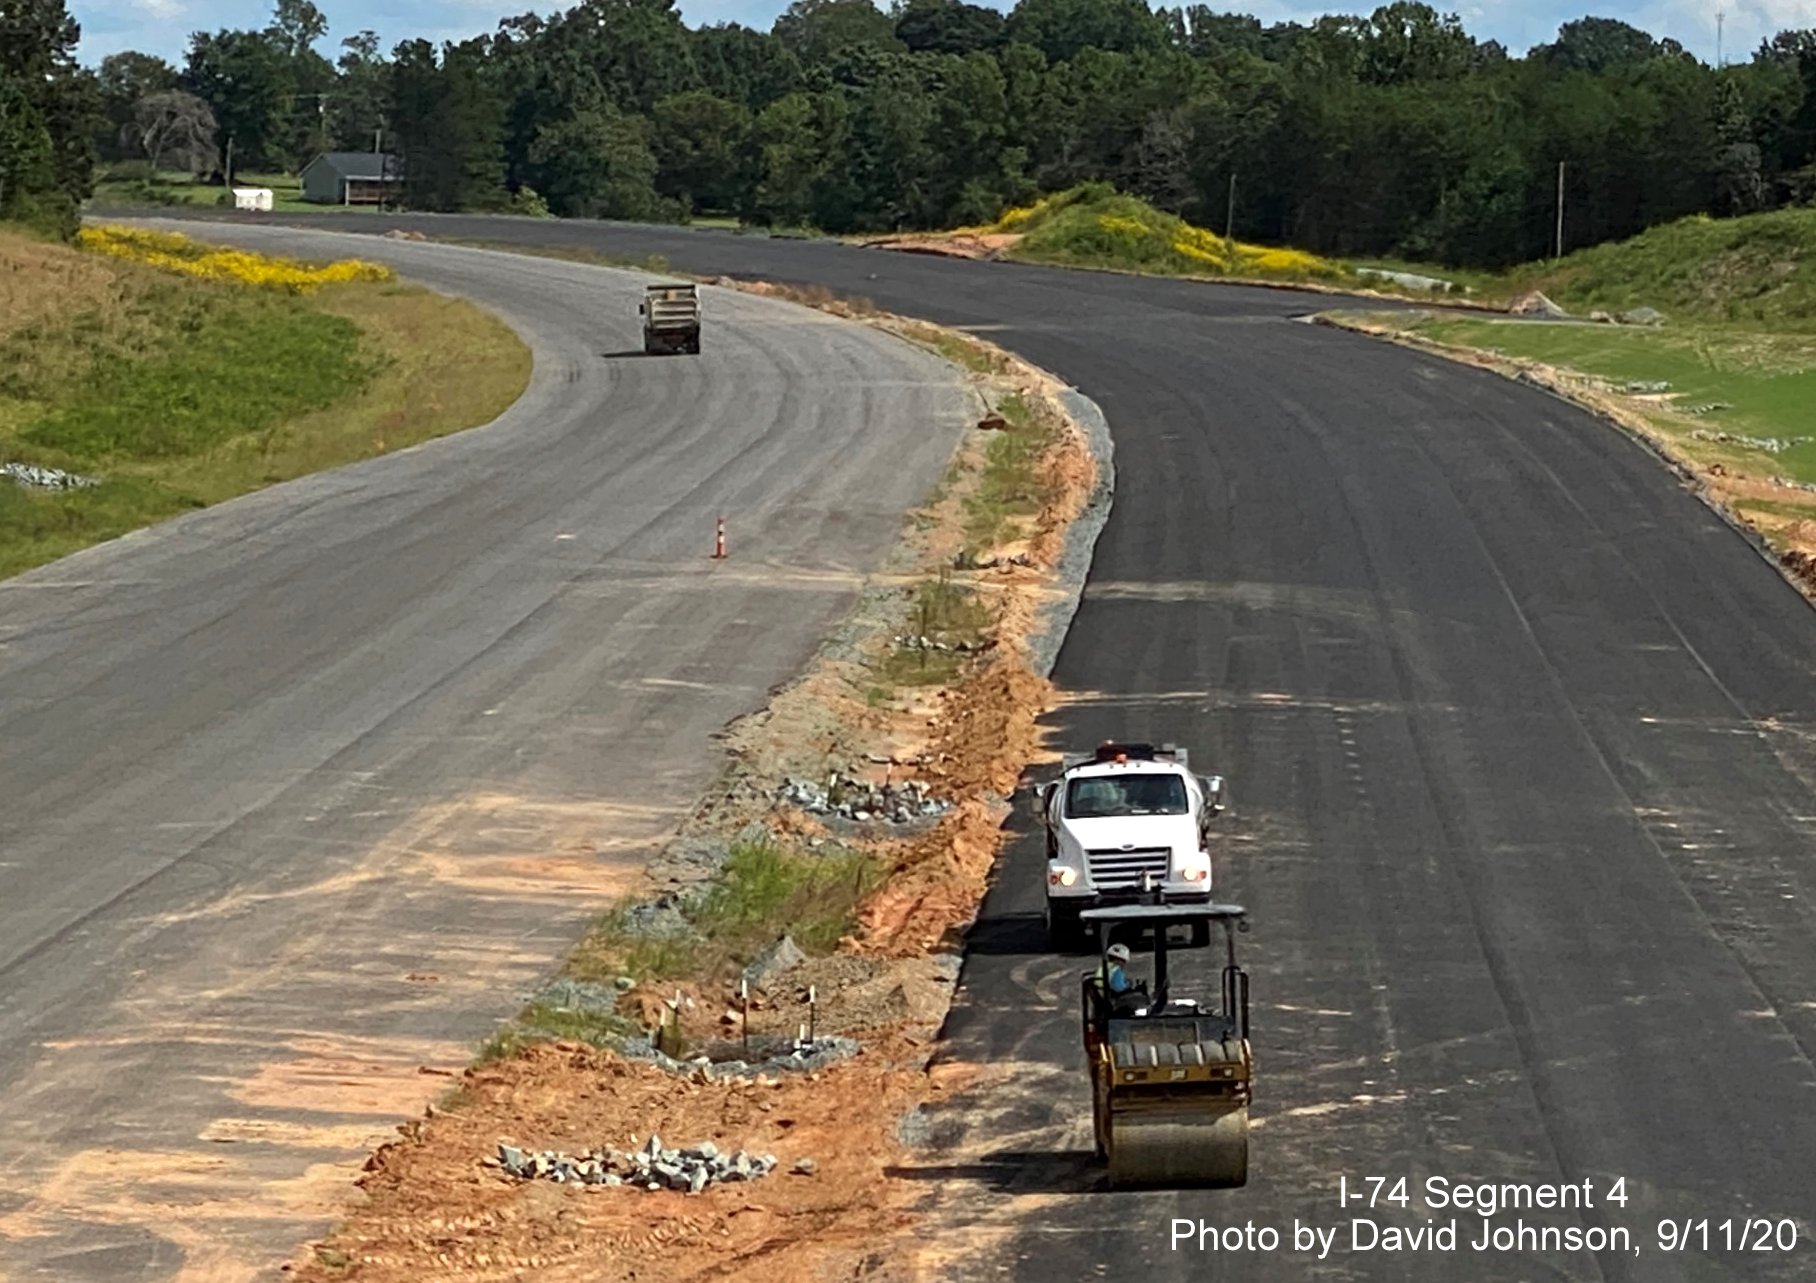 Image looking east from future US 311 bridge over I-74 Winston Salem Northern Beltway looking east, by David Johnson September 2020